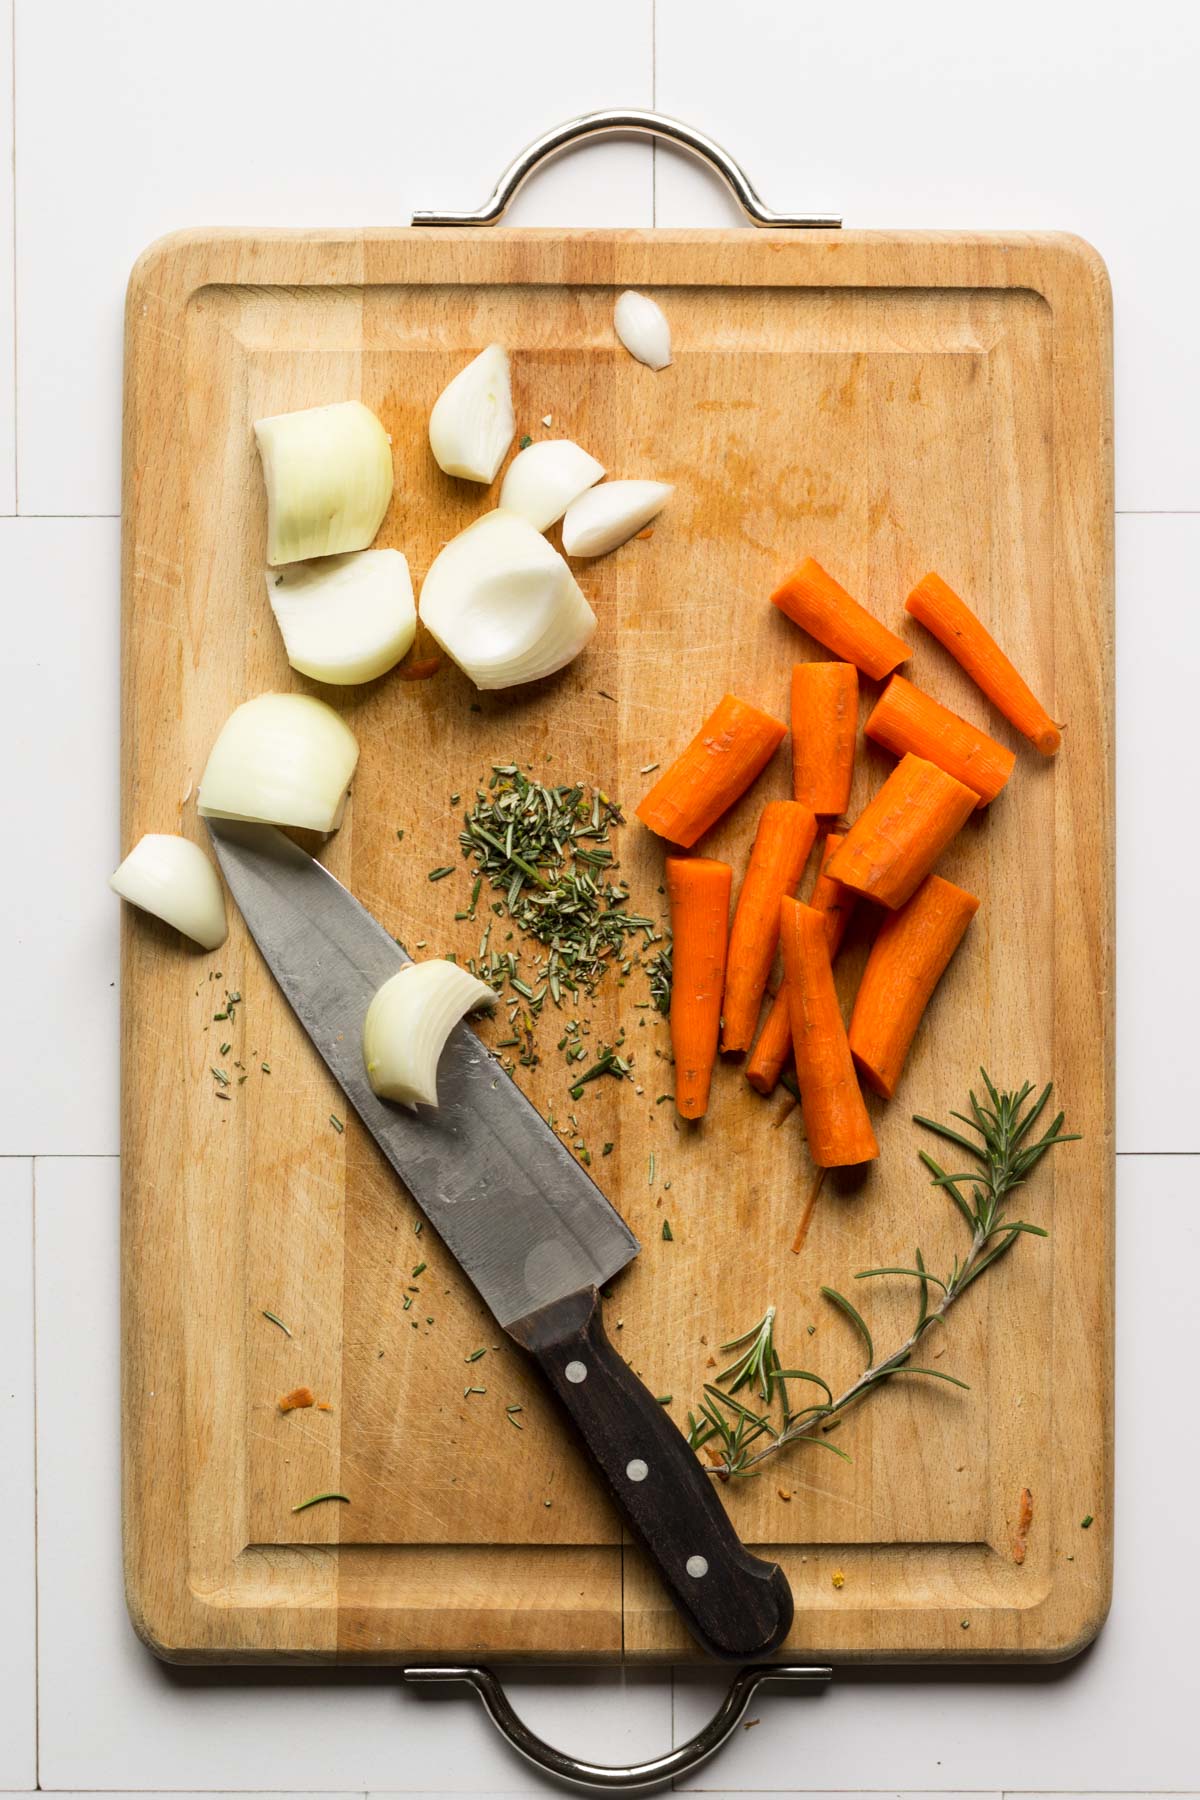 Chopped carrots, onions, and rosemary on a cutting board